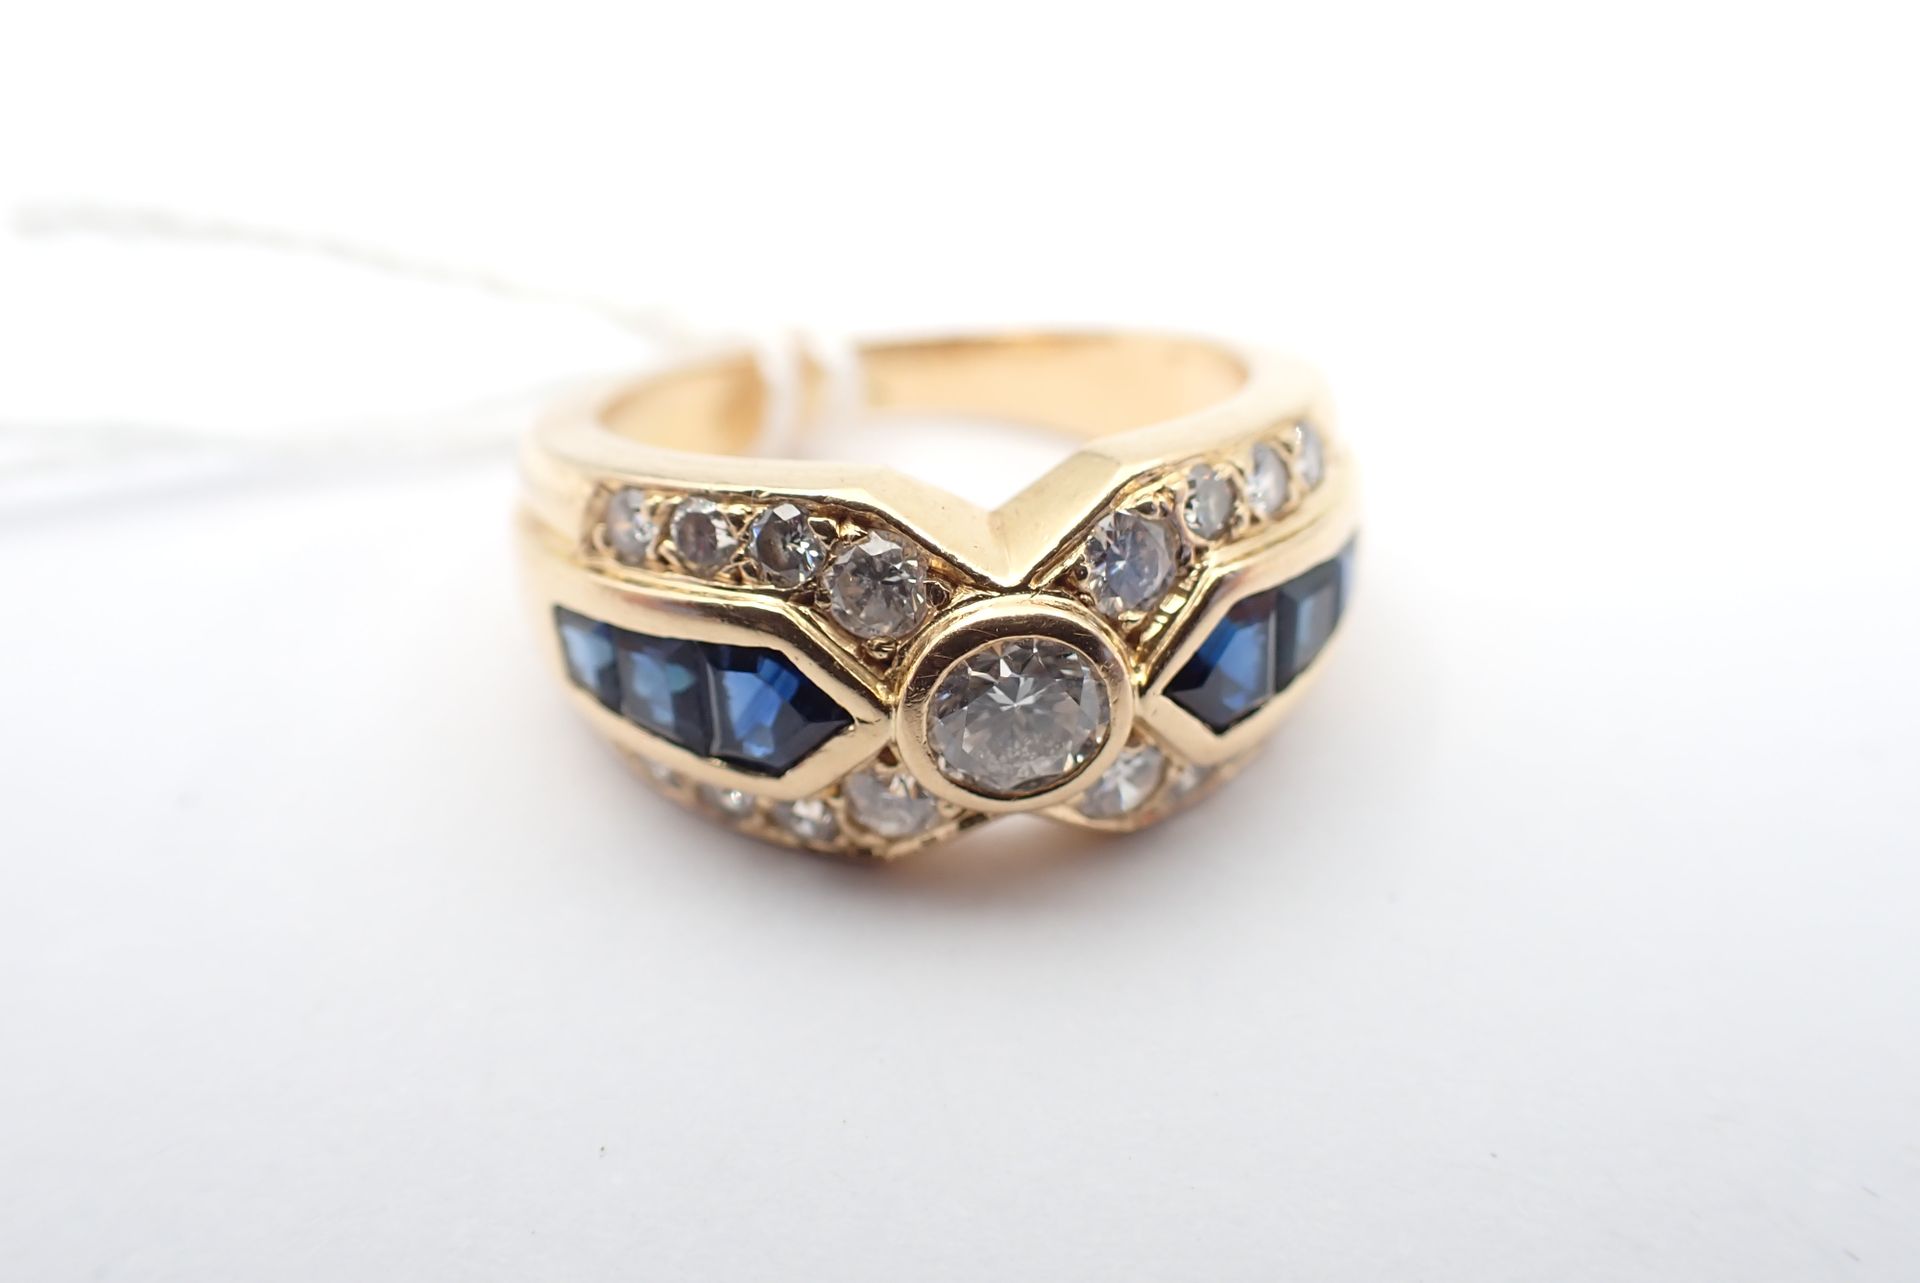 Null Ring in yellow gold, diamonds and calibrated sapphires, weight 6.6g, TDD 53